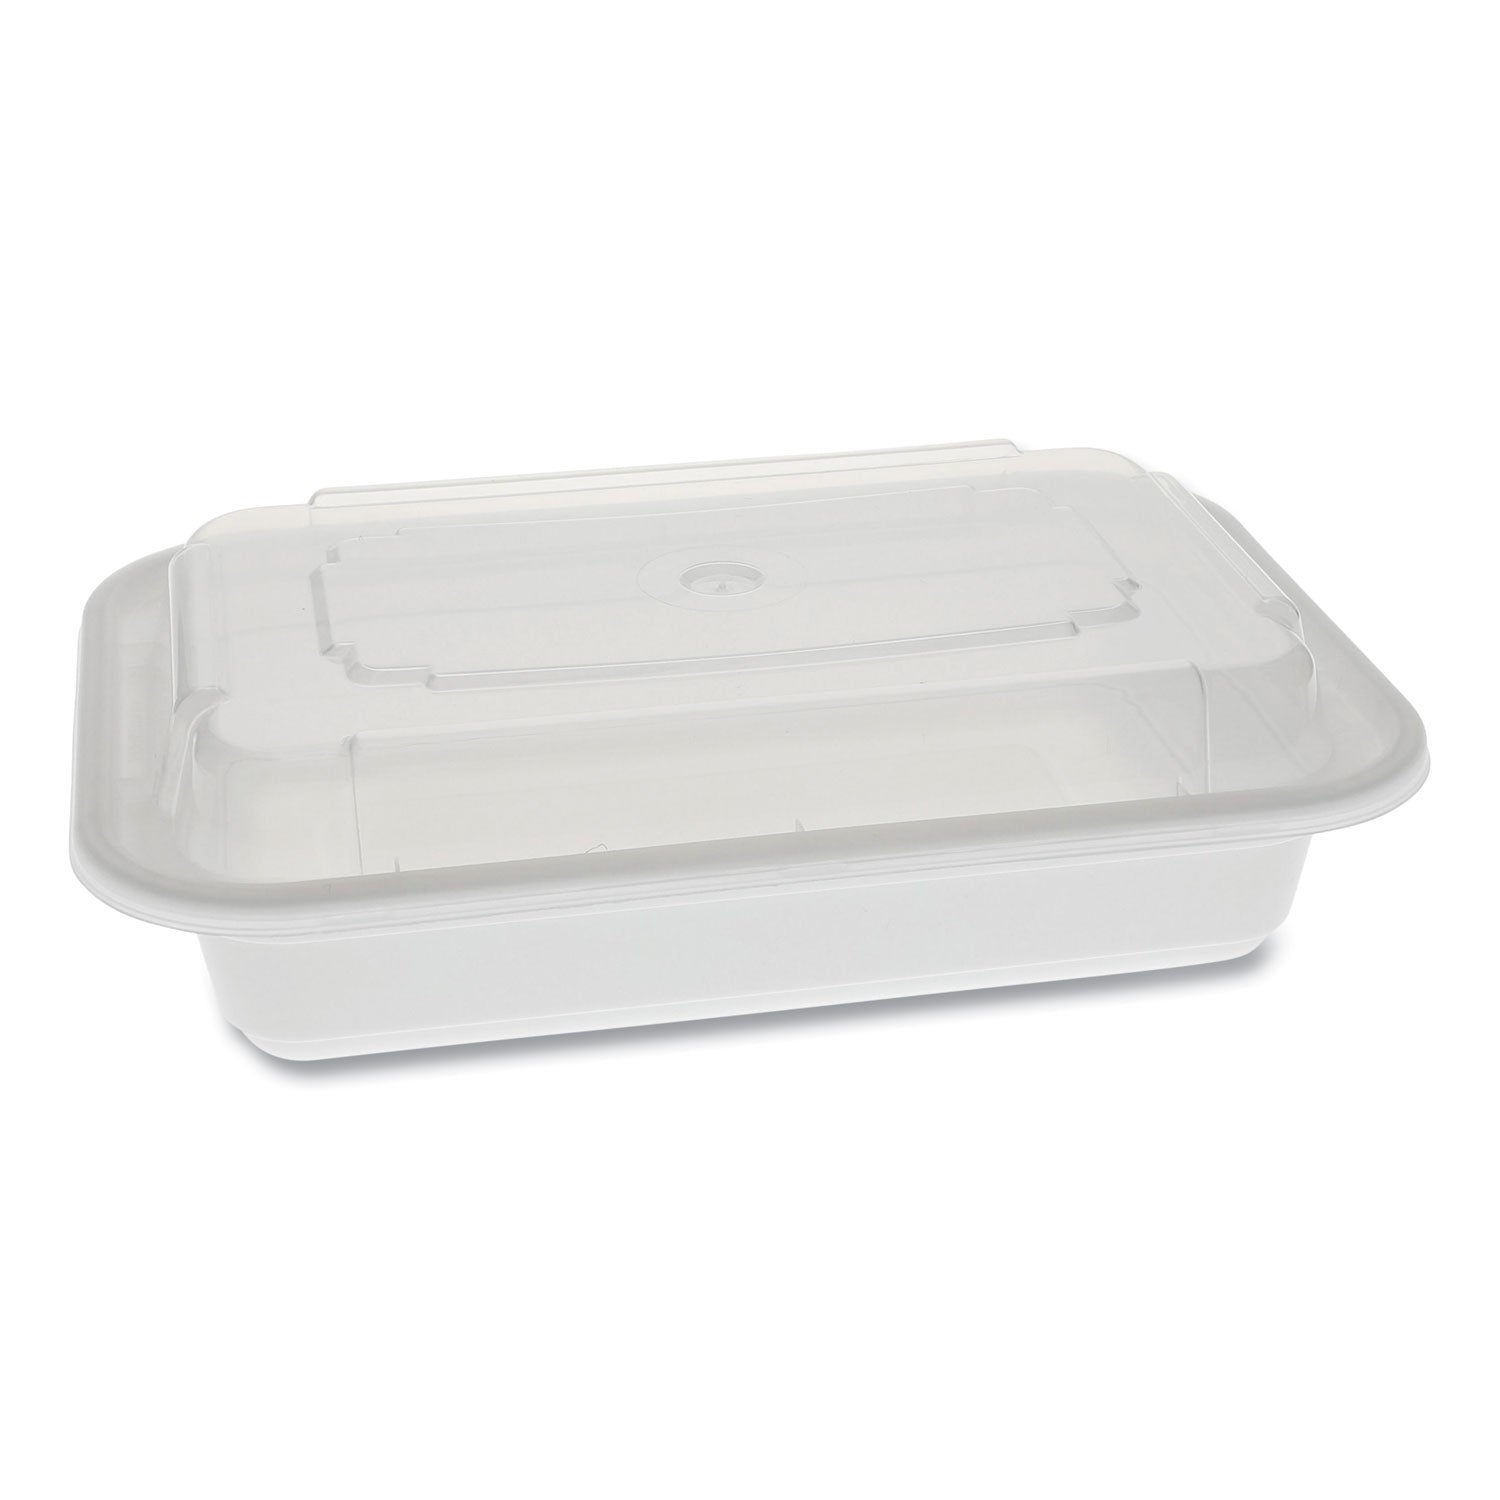 newspring-versatainer-microwavable-containers-rectangular-16-oz-5-x-725-x-2-white-clear-plastic-150-carton_pctnc8168 - 1